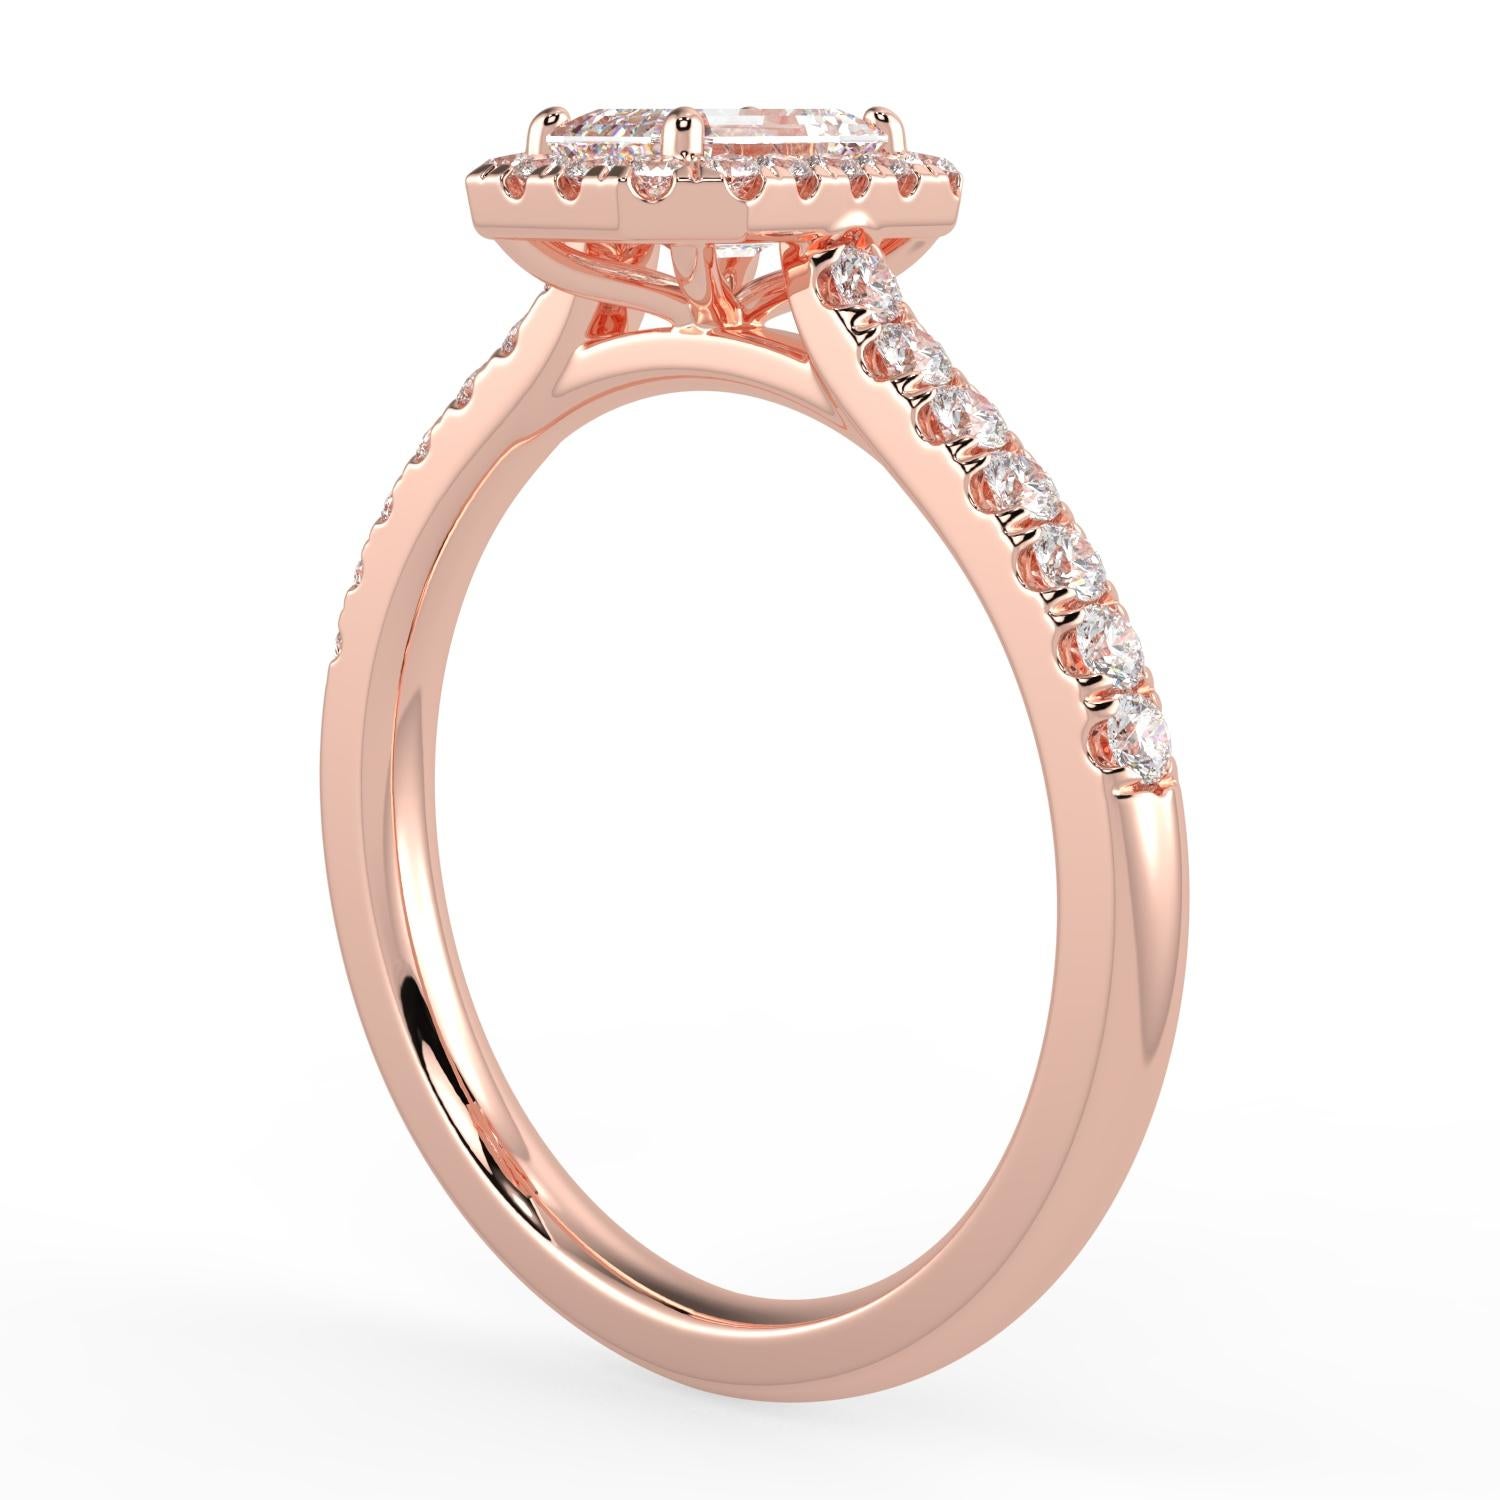 1ct Natural Diamond G-H Color SI Clarity Perfect Design Shape Halo Fashion Stunning Promise Ring 14K Rose  Gold

Specification:
Brand: Aamiaa
Metal: Rose Gold
Metal Purity: 14k
Center Diamond Shape: Emerald
Design: Halo
Center Carat Weight: